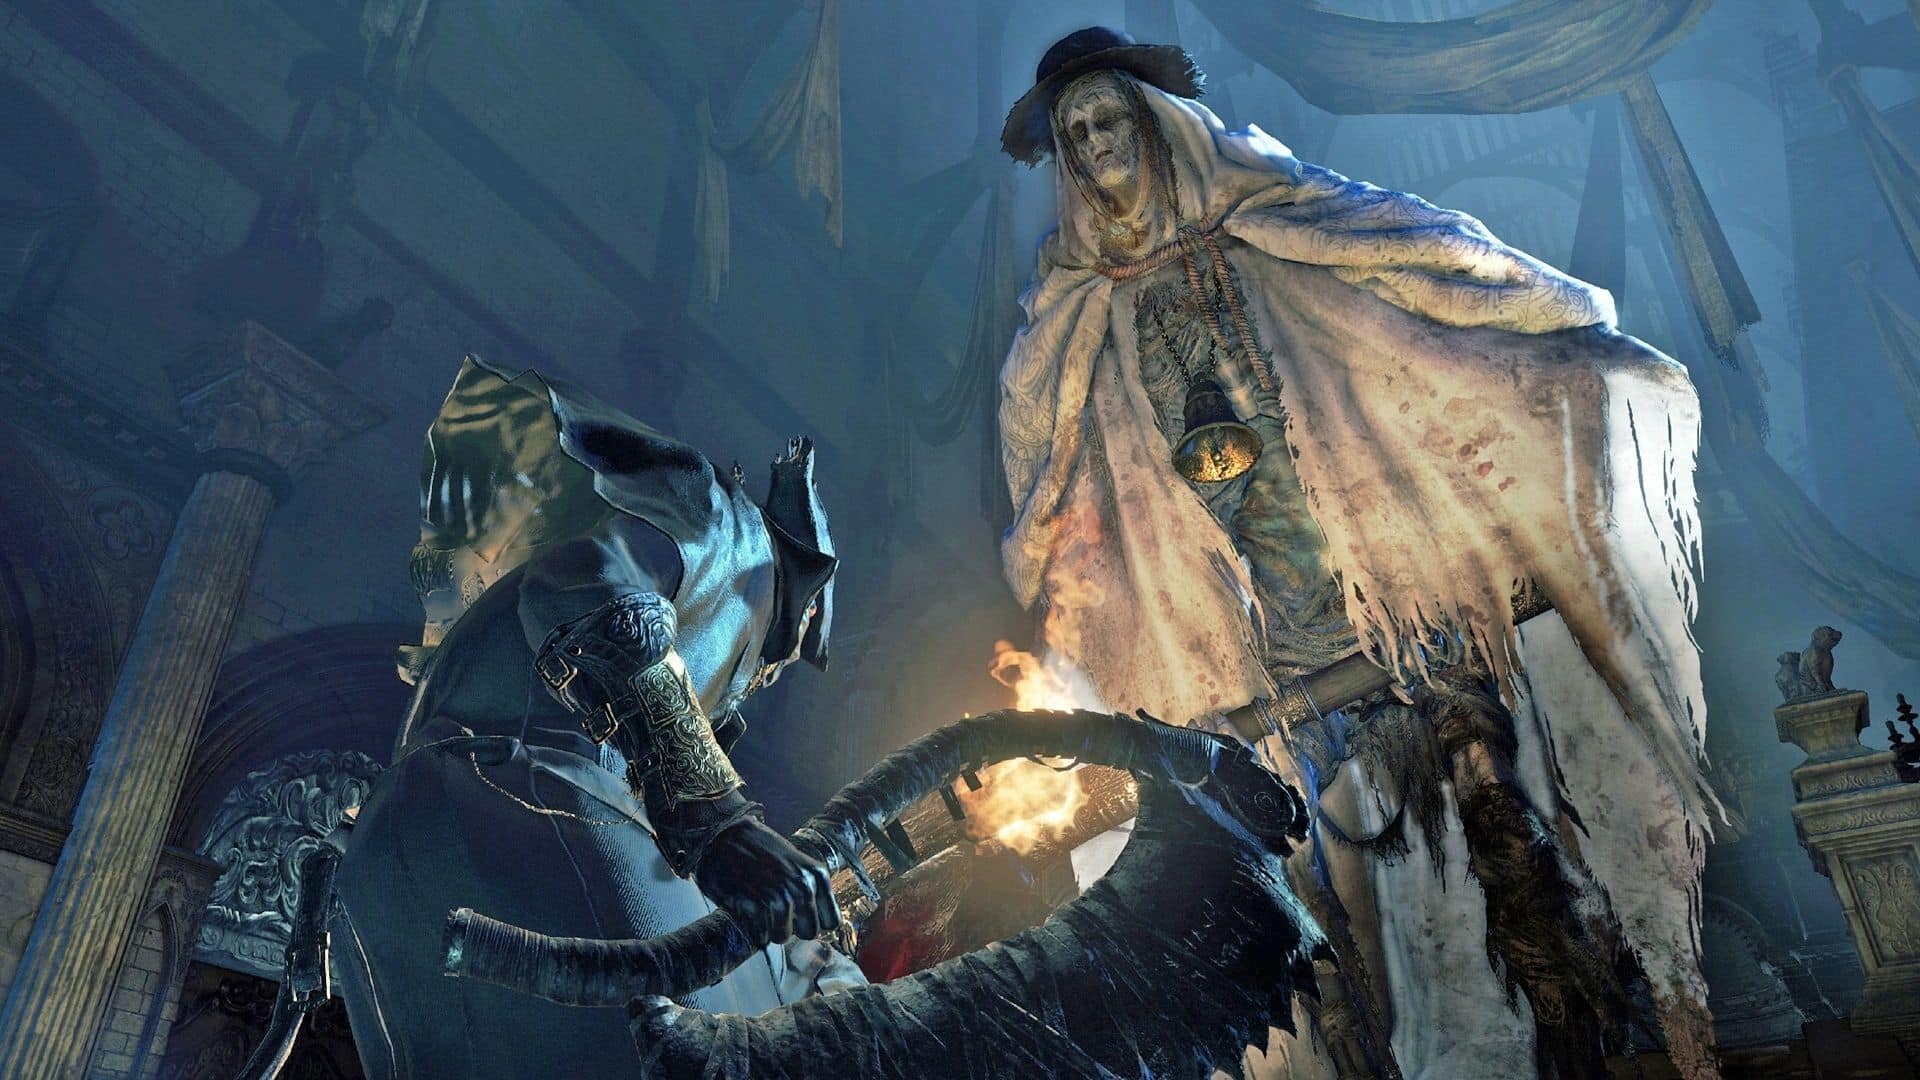 player encountering giant enemy